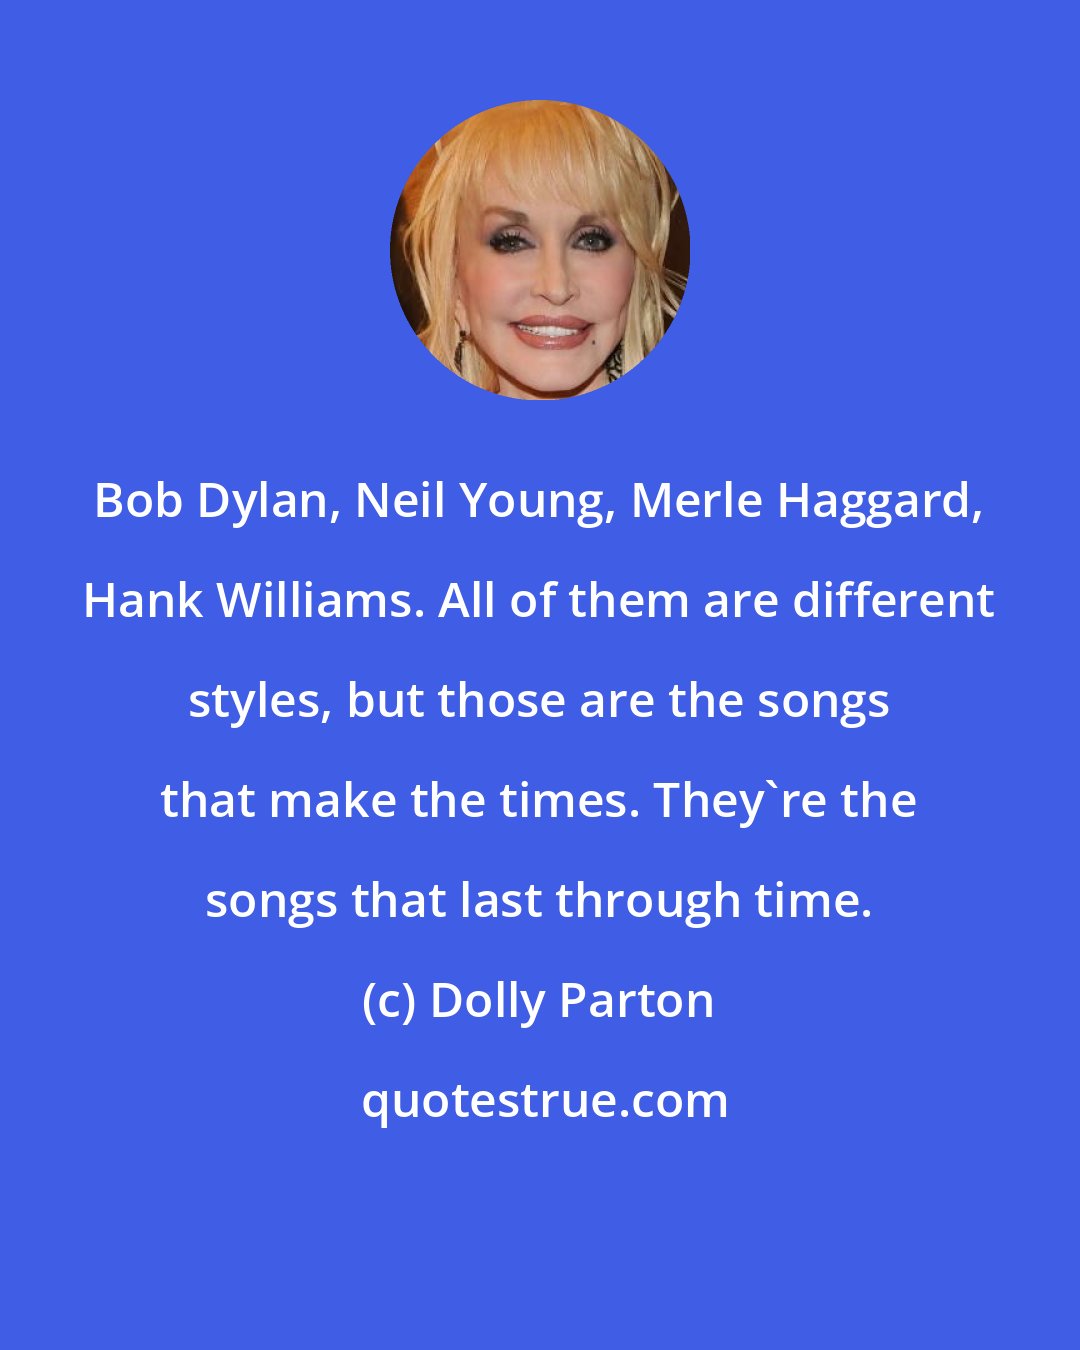 Dolly Parton: Bob Dylan, Neil Young, Merle Haggard, Hank Williams. All of them are different styles, but those are the songs that make the times. They're the songs that last through time.